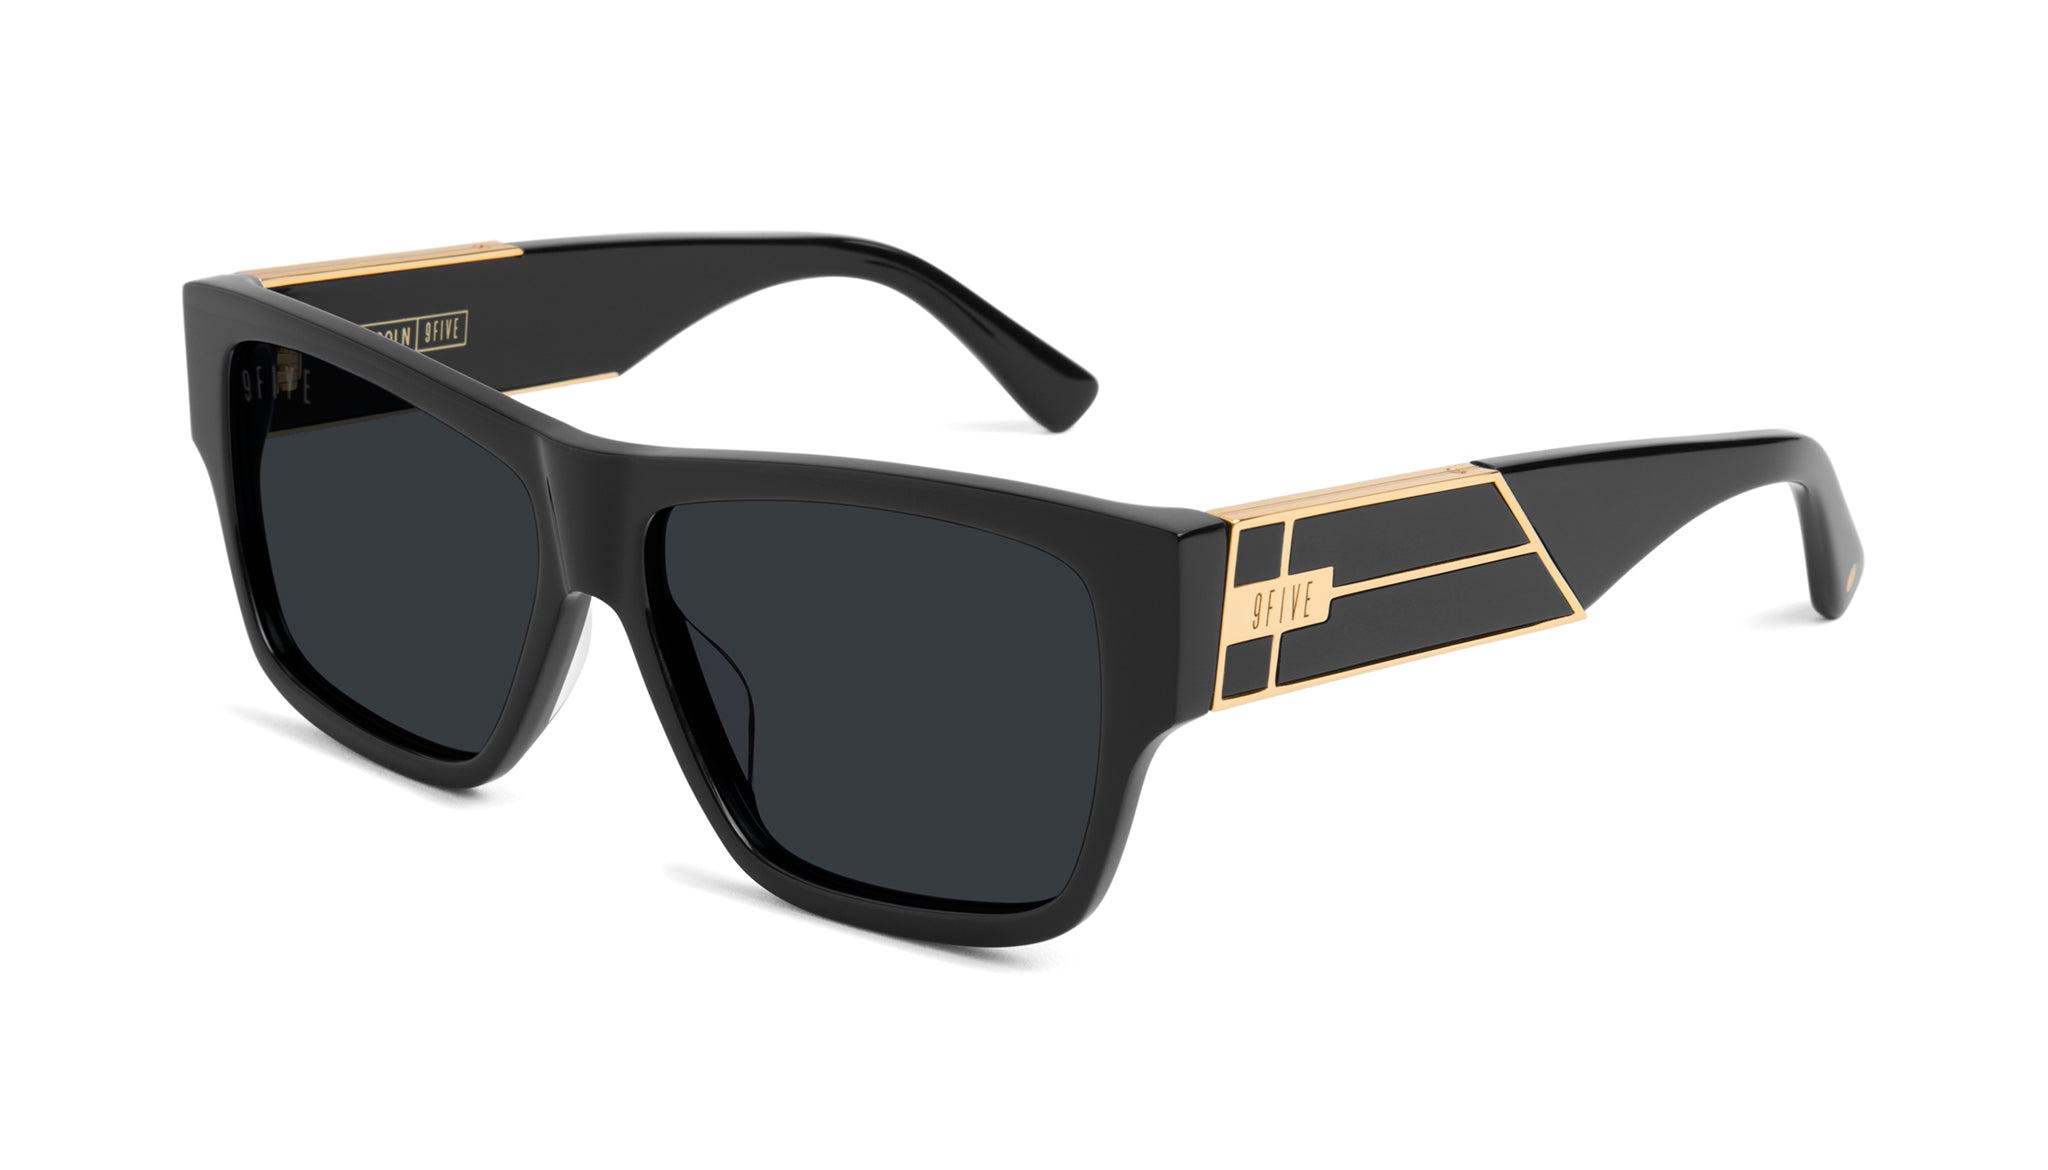 NS2006GFBL Stainless Steel Gold Frame with Black Glass Lens Sunglasses